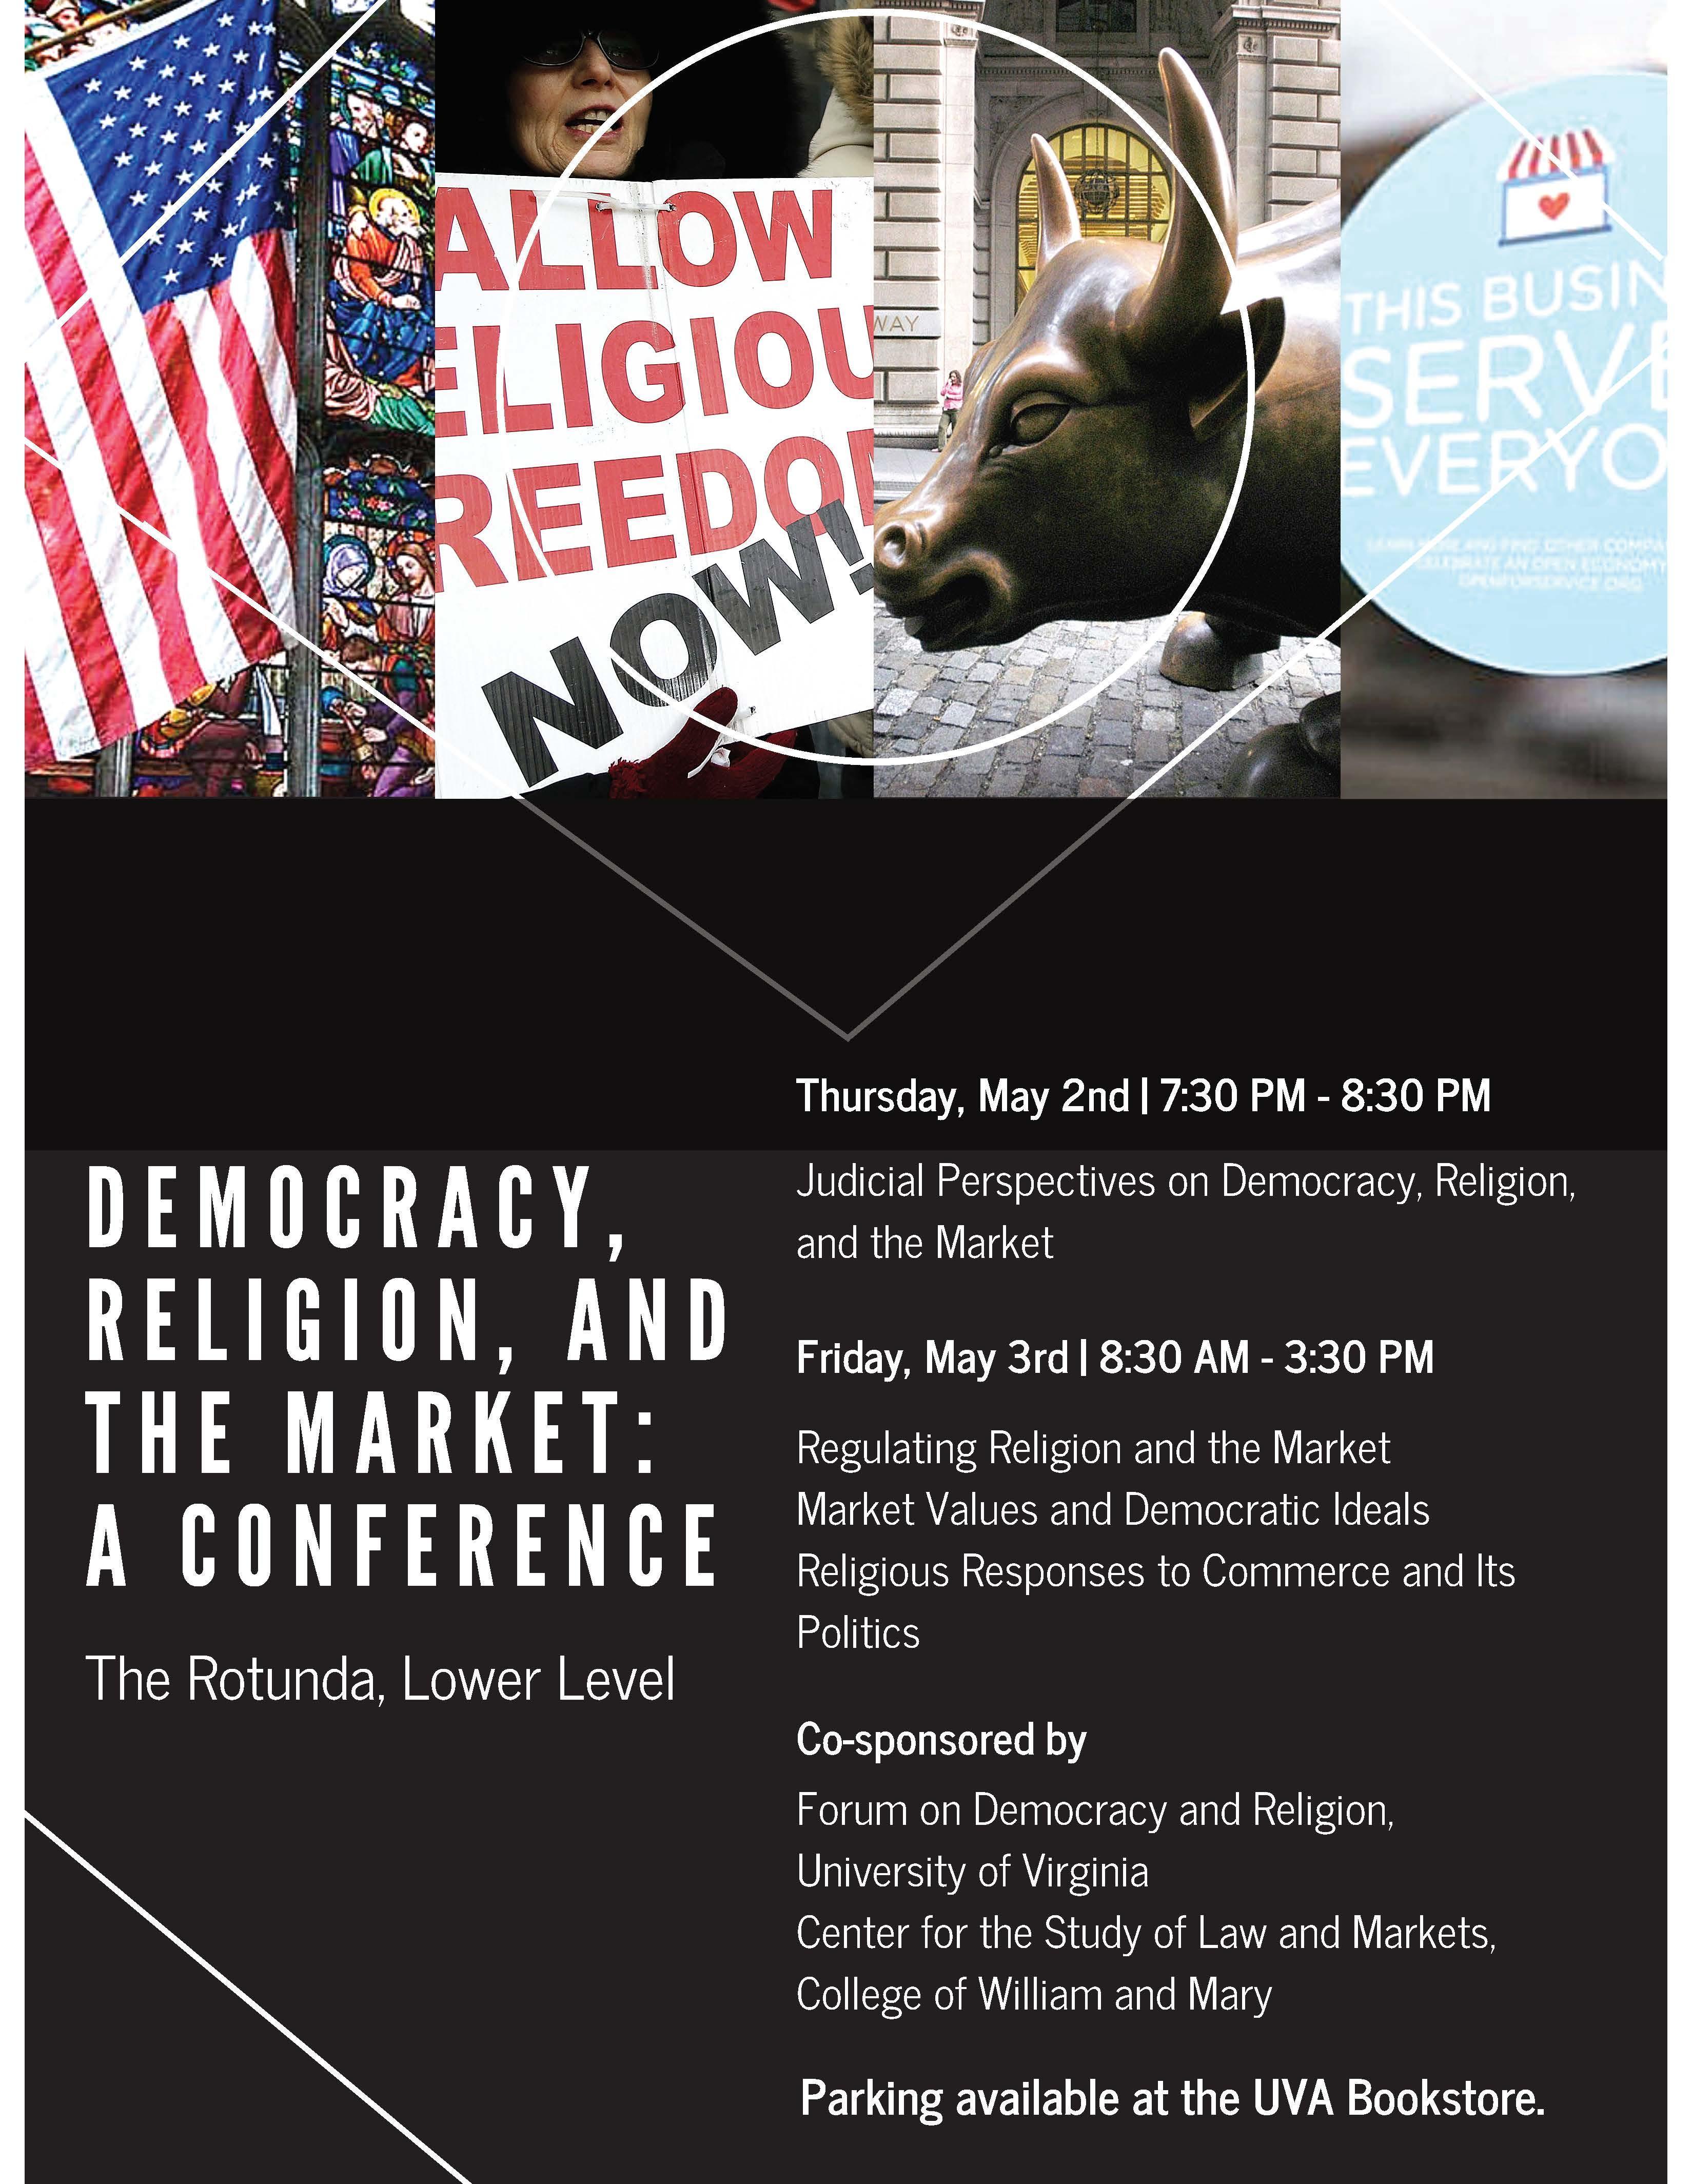 Publicity poster for Democracy, Religion, and Market event